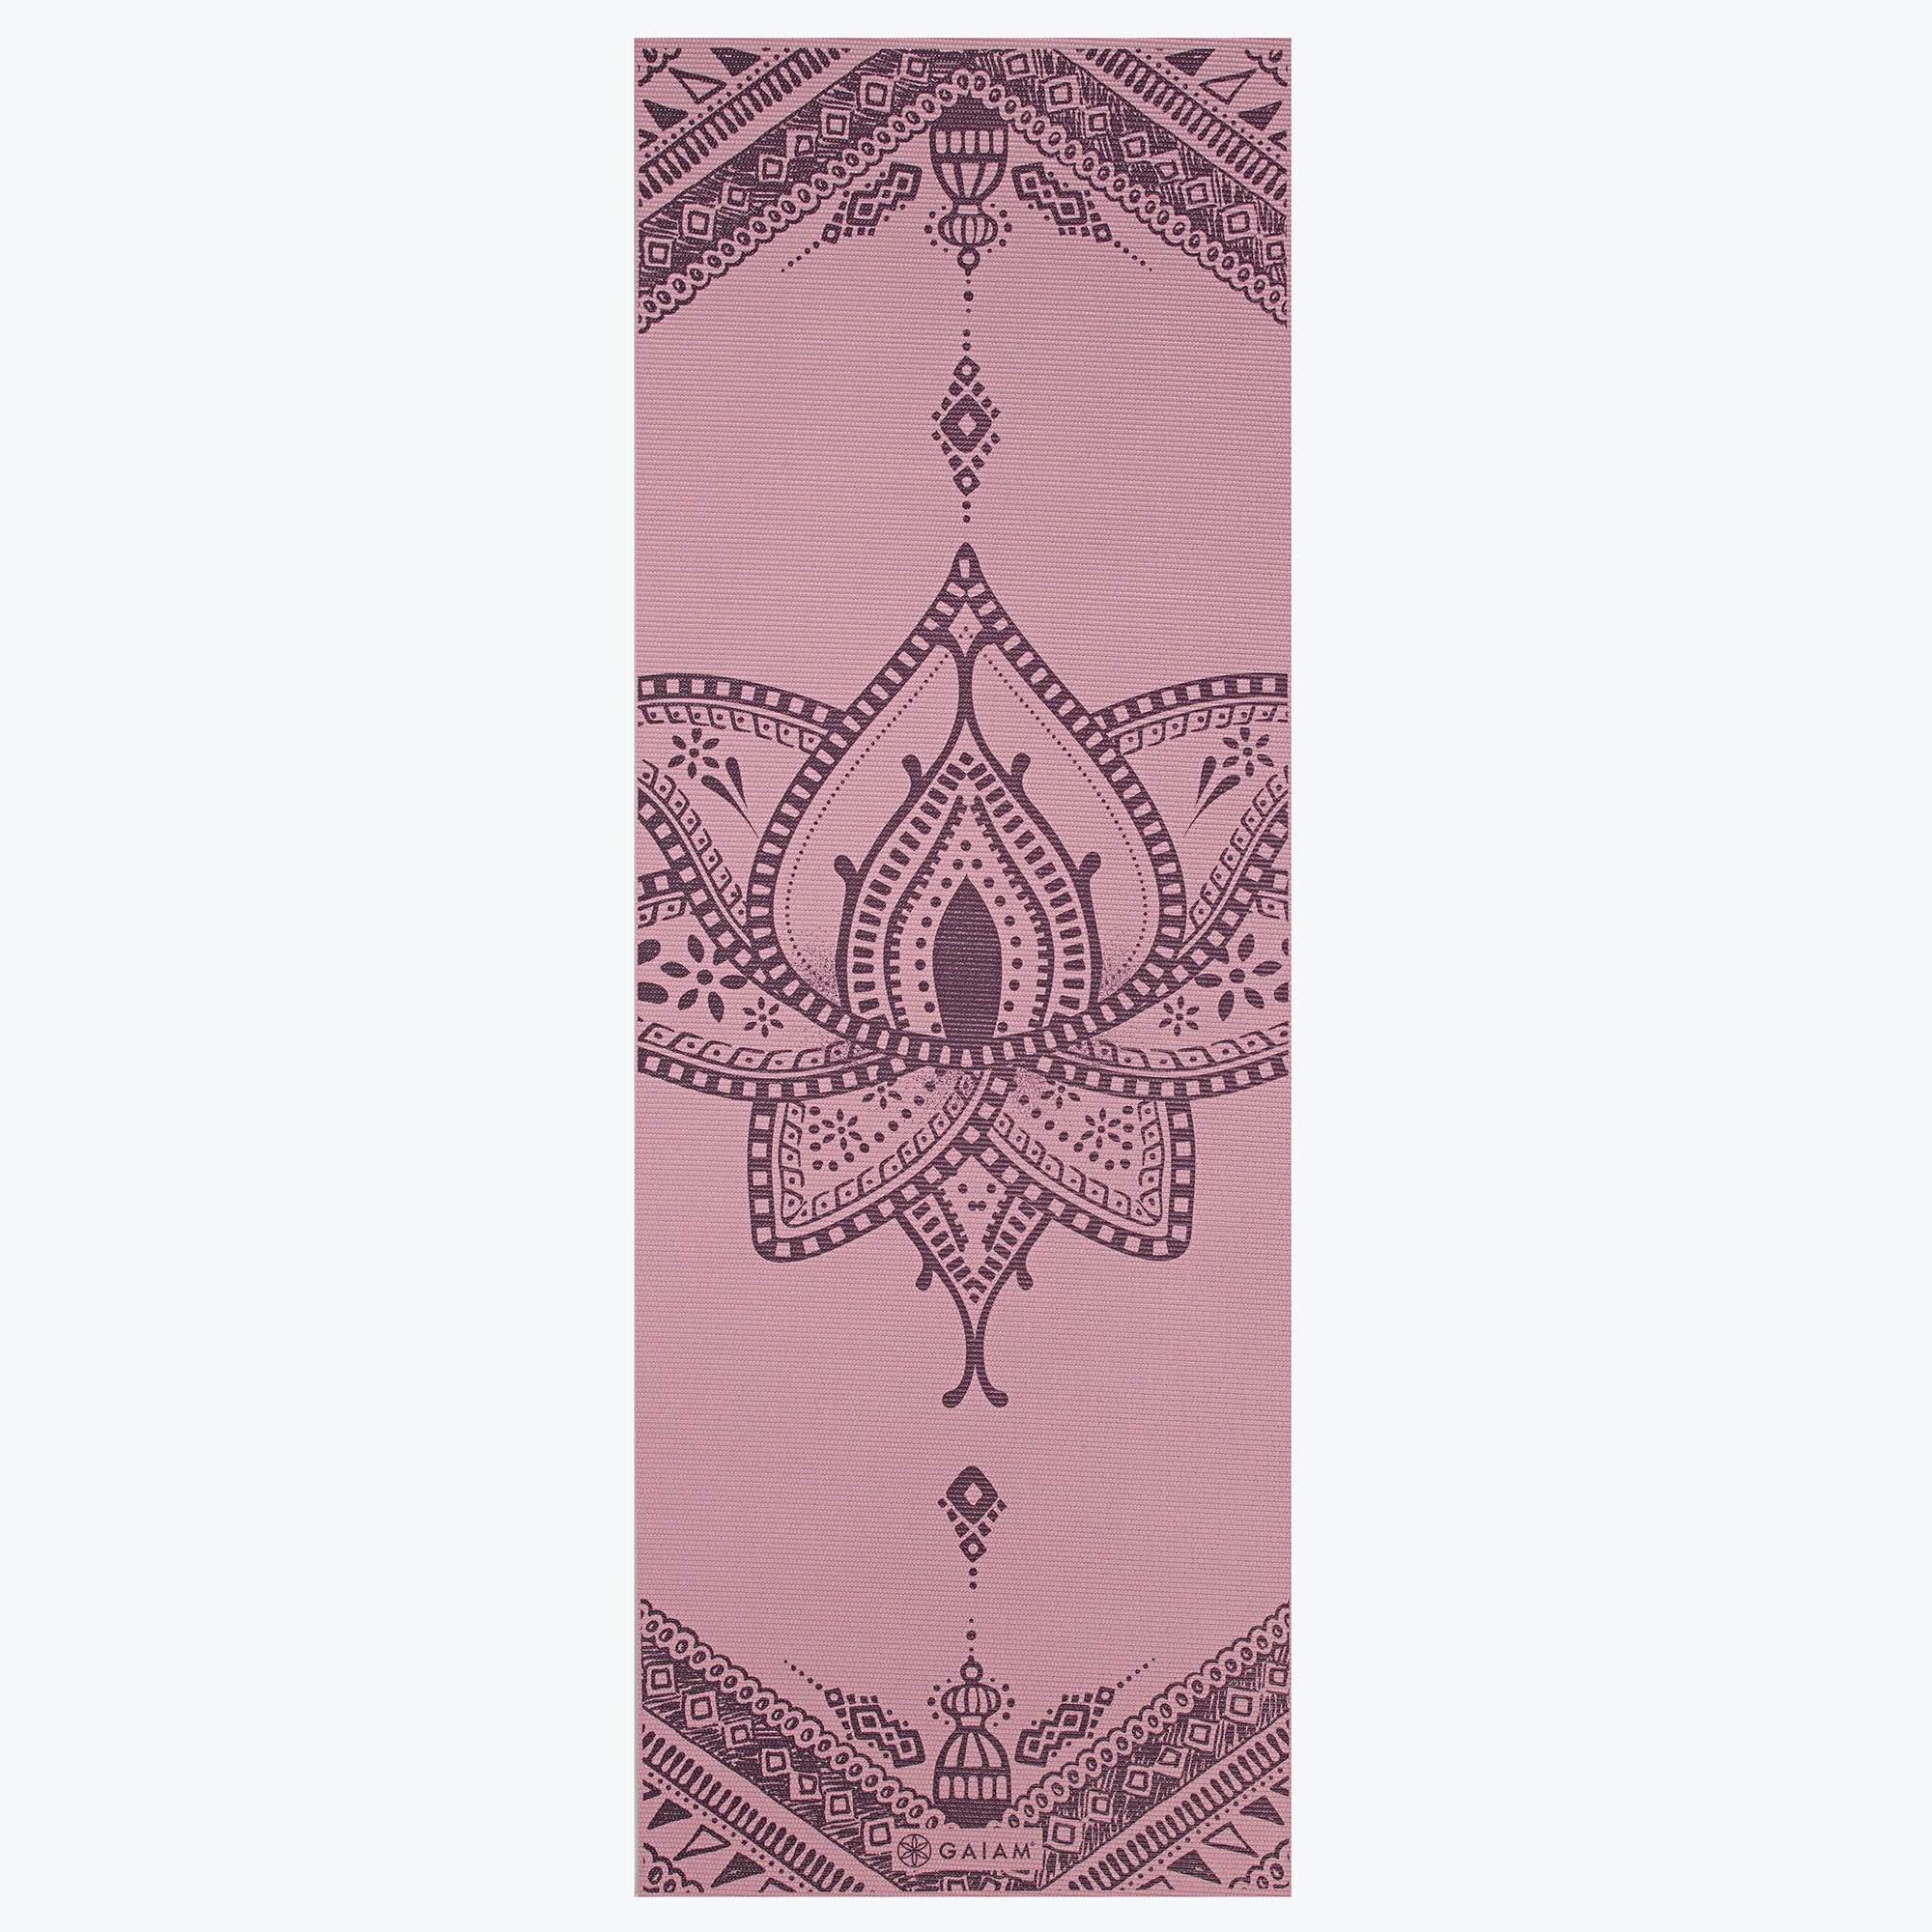 An image of a Gaiam's yoga mat.